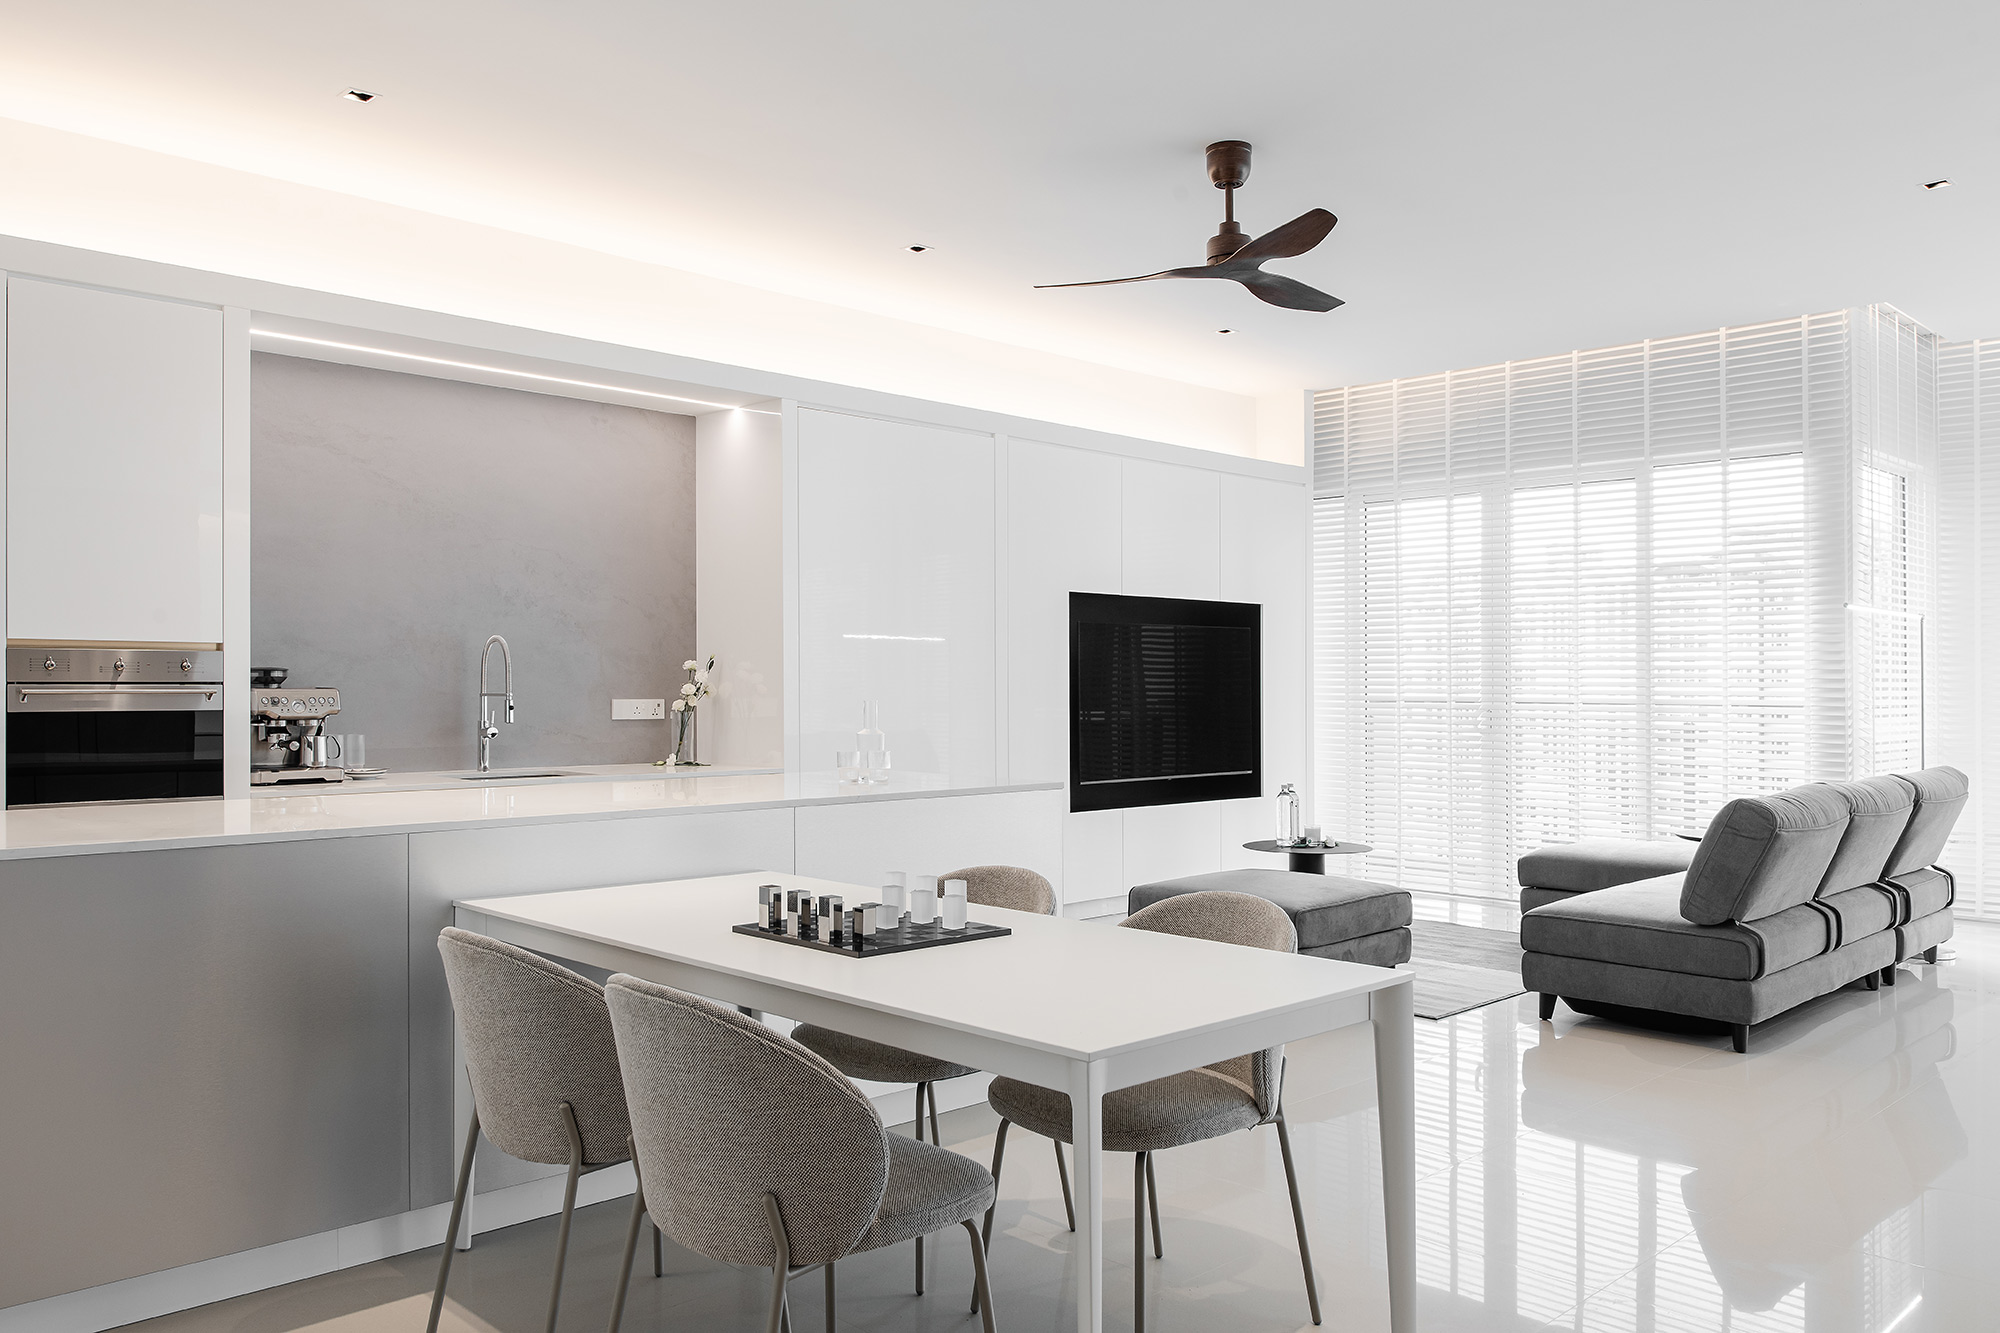 Image of Ori Refuge Ippo PavilionHilltop 3 in A Scandifornian home with a bright and elegant kitchen - Cosentino